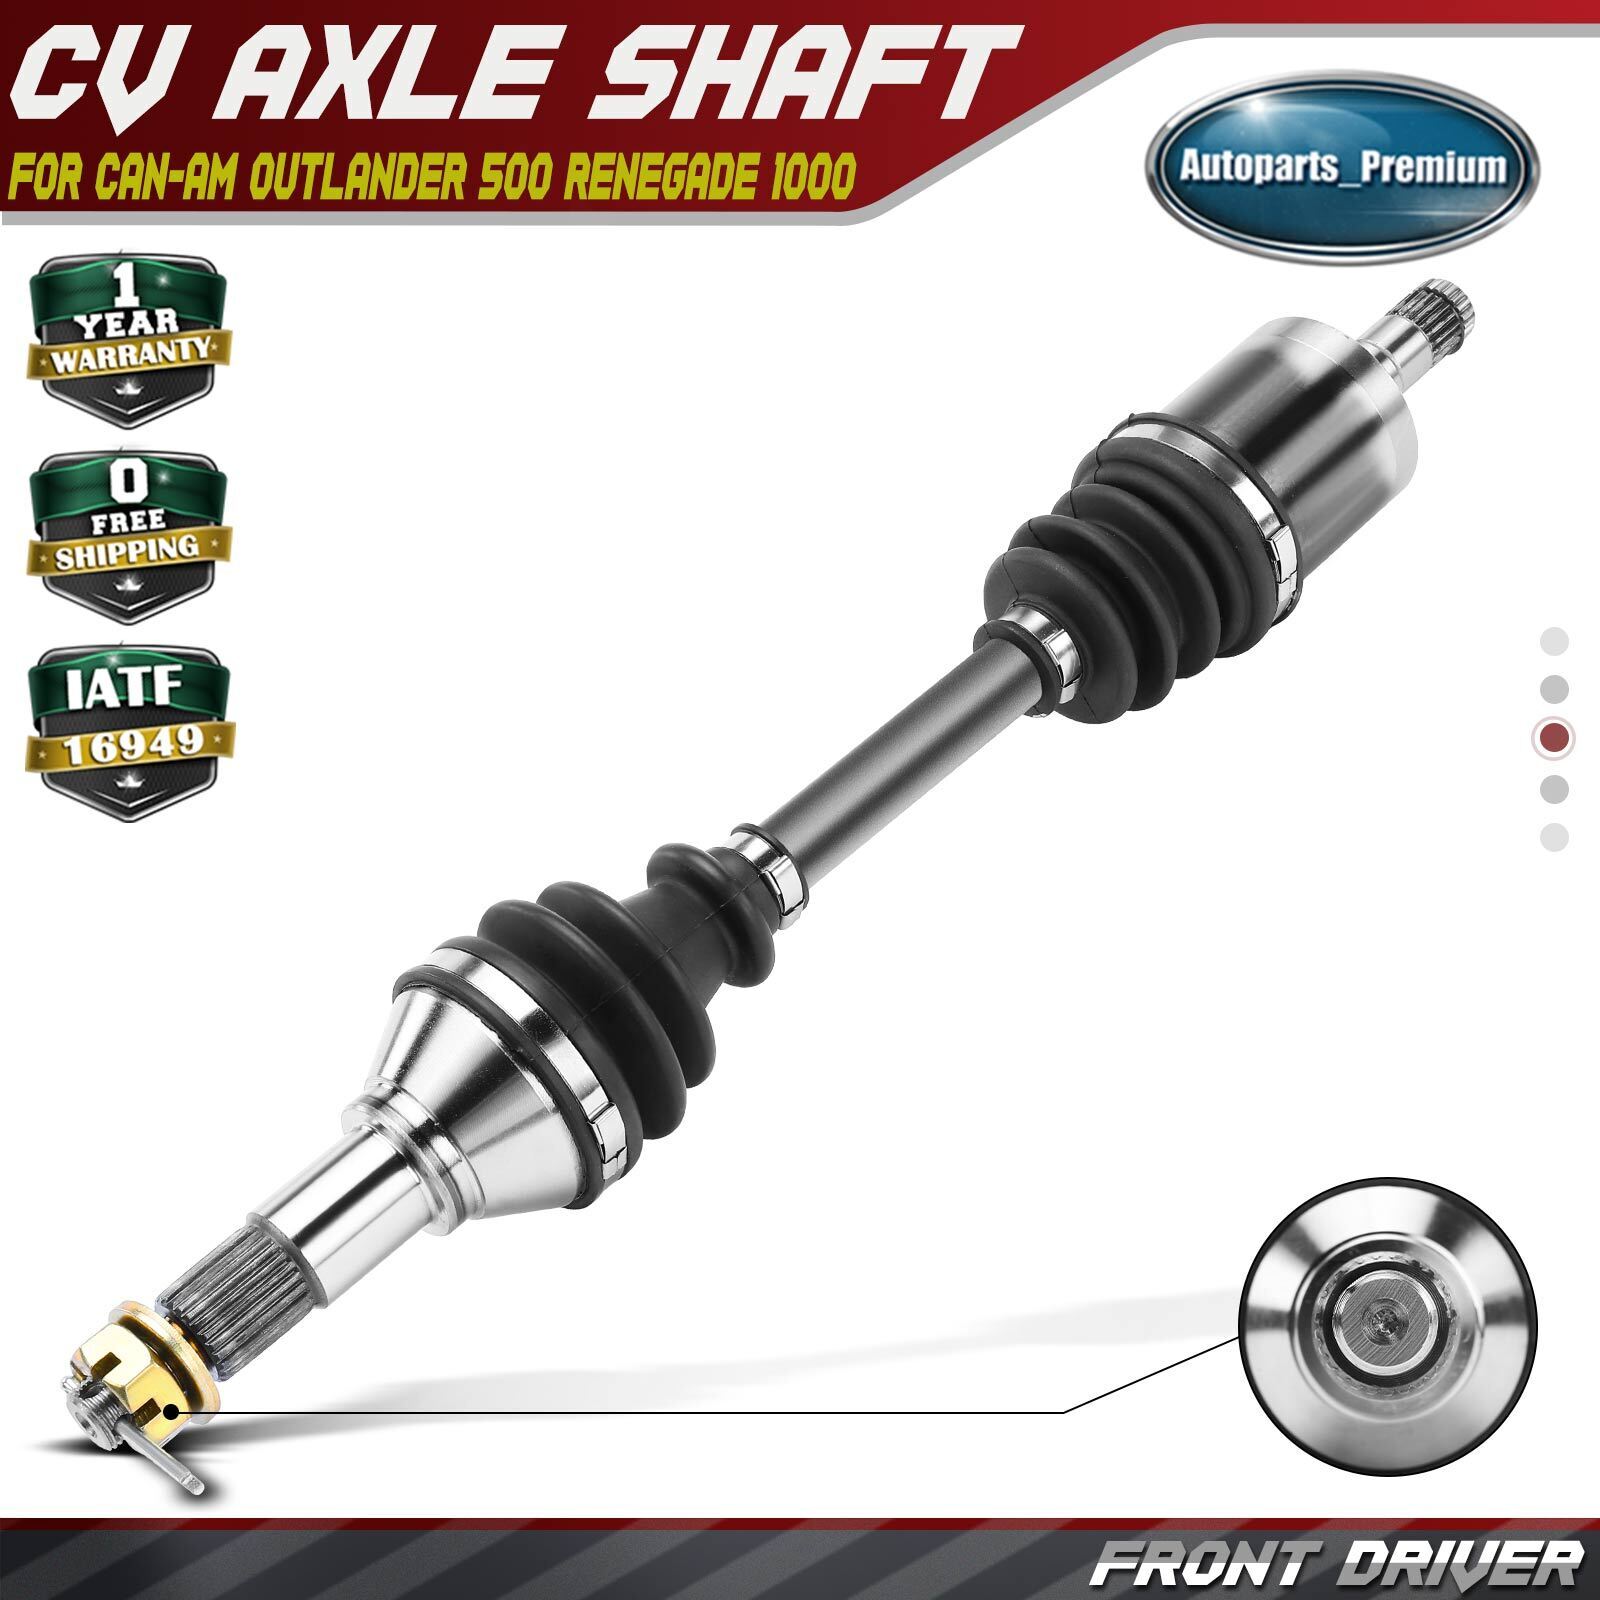 Front Left CV Axle Assembly for Can-Am Outlander 500 650 800R 1000 Renegade 1000